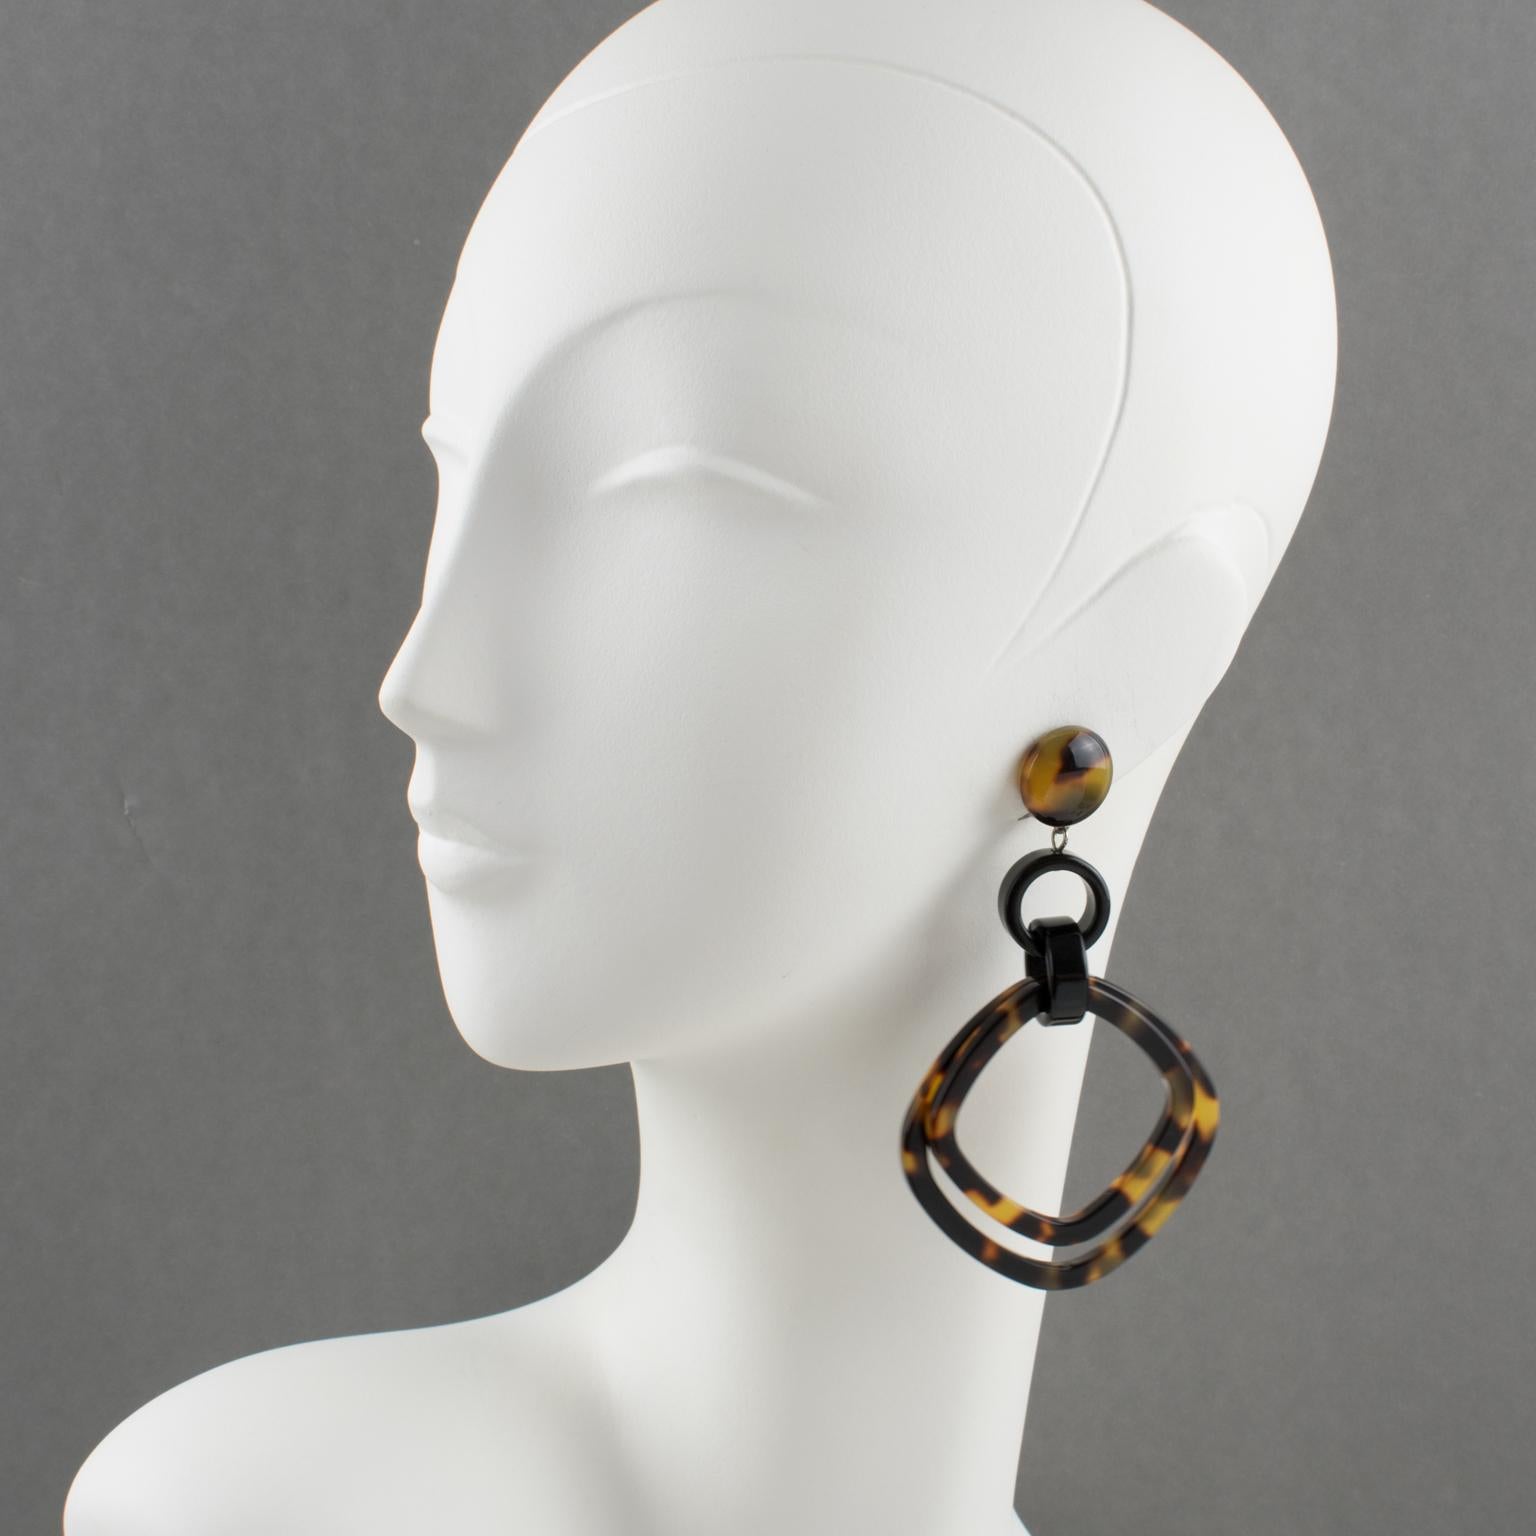 Angela Caputi, Italy, designed those elegant resin clip-on earrings. The pieces boast a dangling shape with black resin geometric links contrasted with large geometric hoops in a tortoise-textured pattern. Her color matching is always extremely